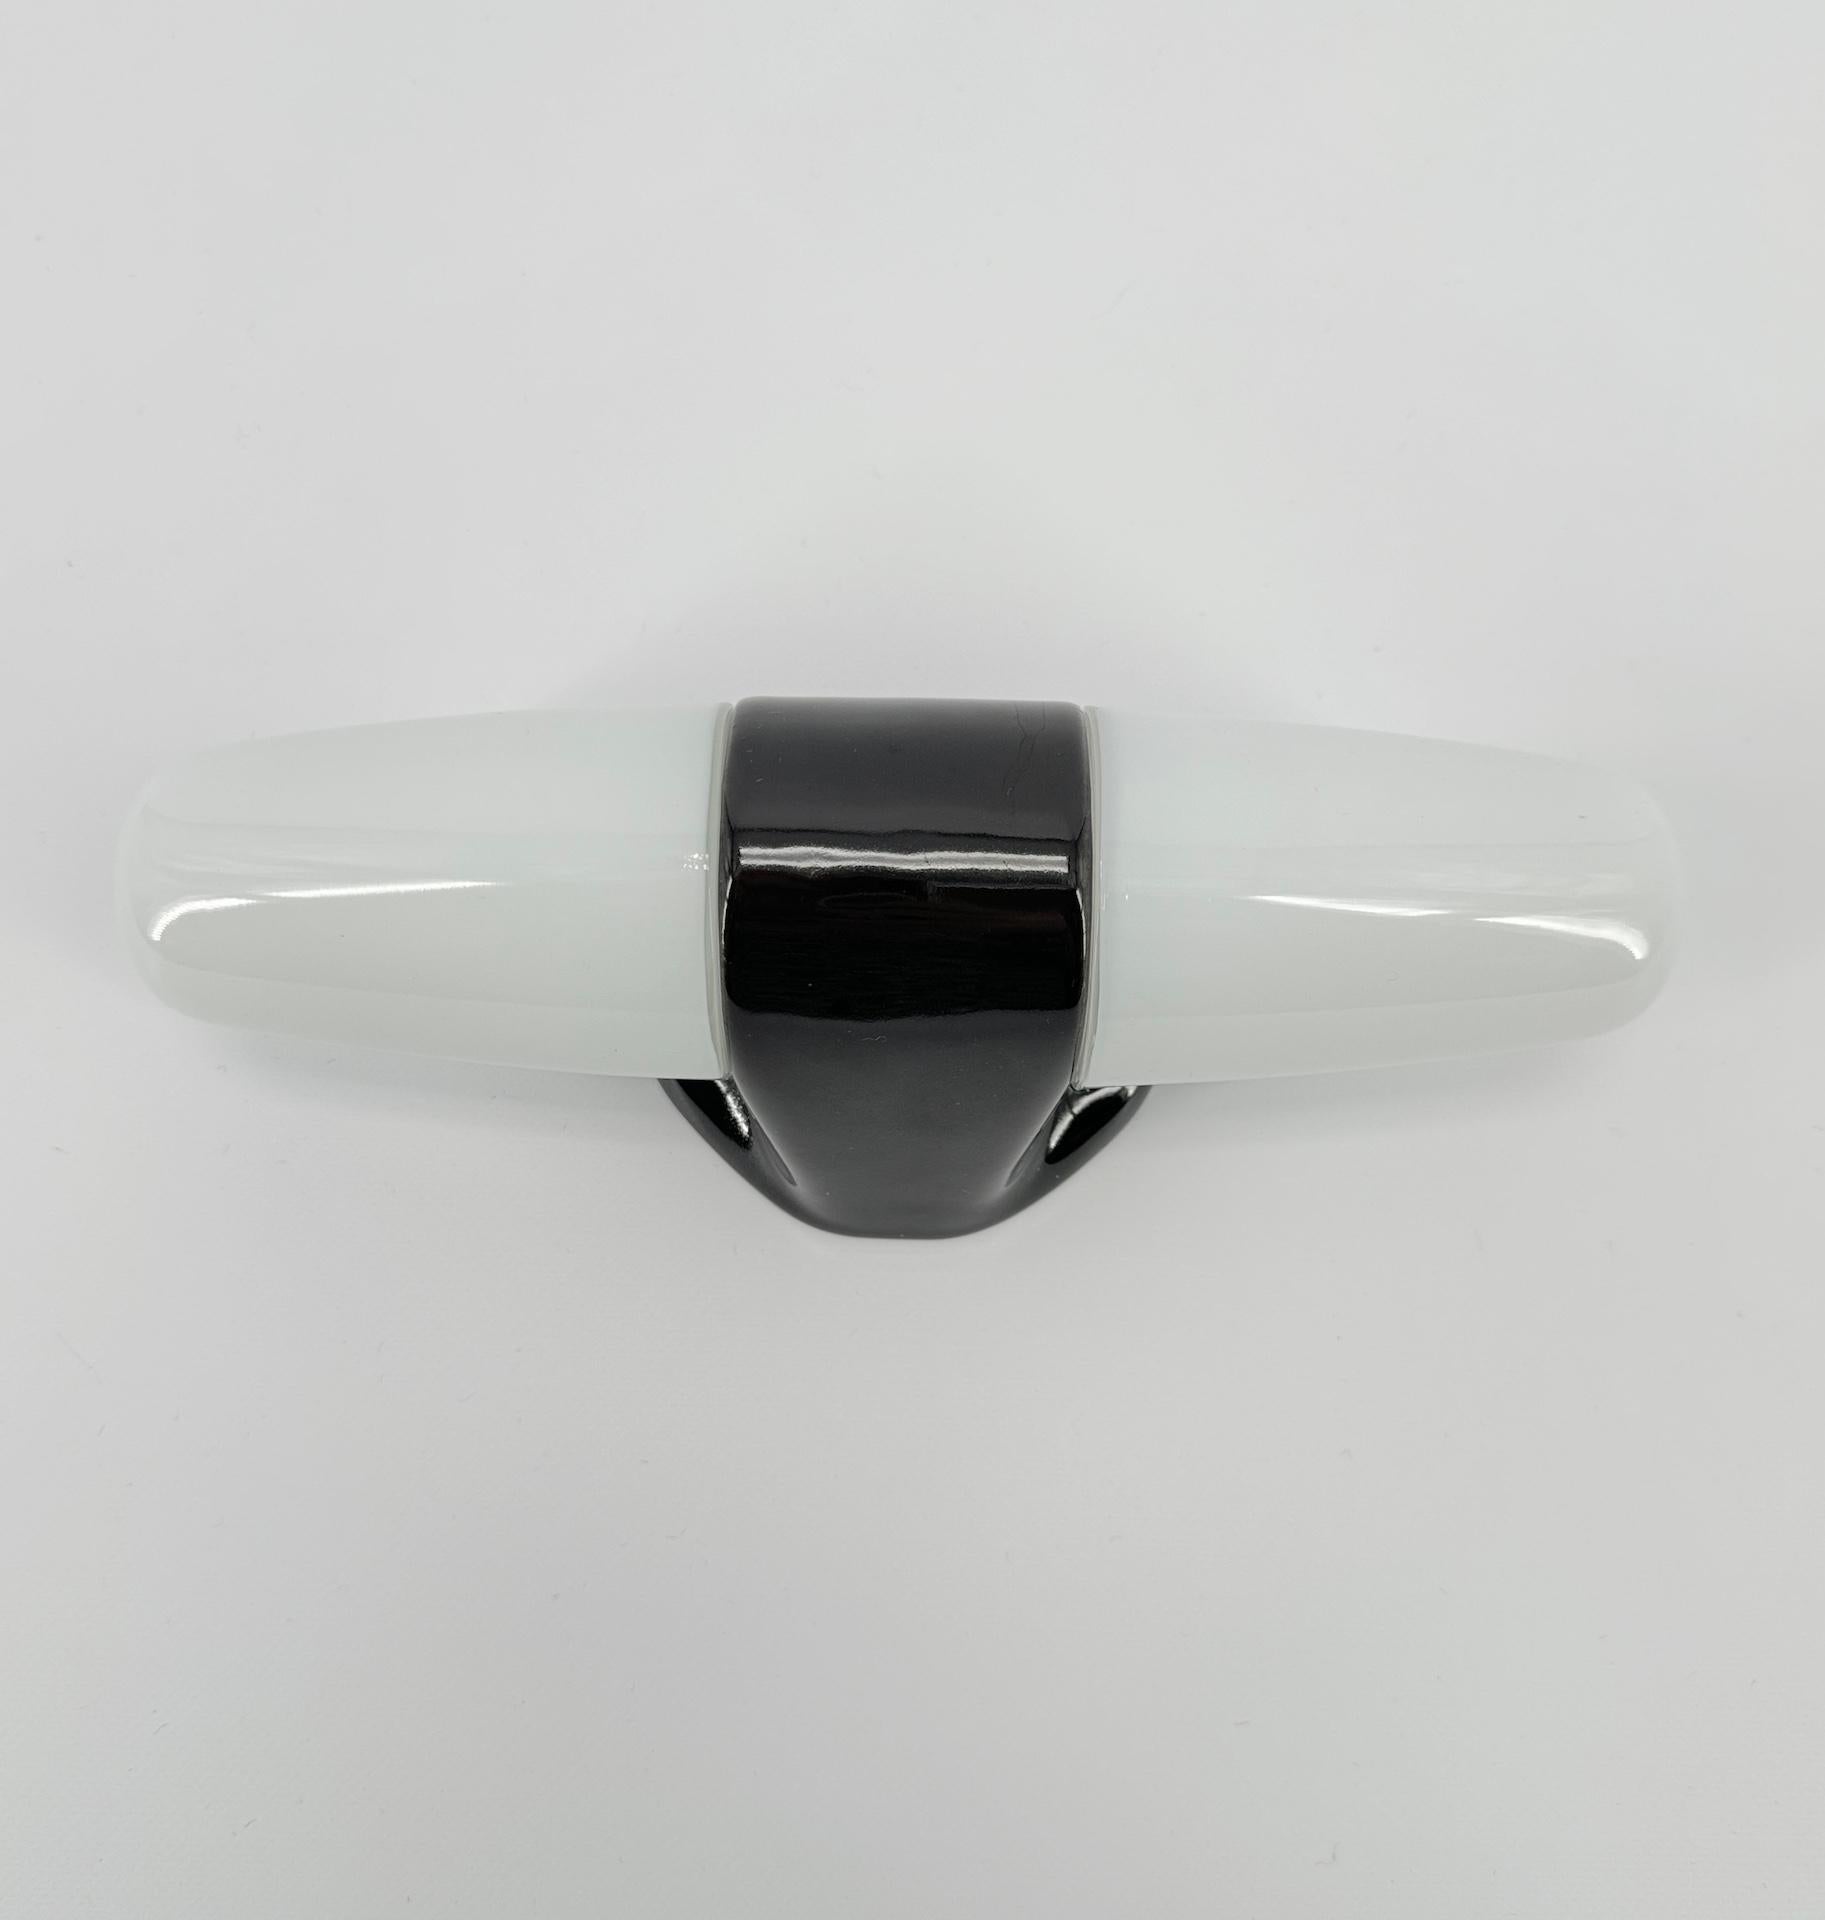 Wall light in black porcelain and opaline glass shades were designed by the German designer Wilhelm Wagenfeld, who studied at the Bauhaus school. 

This model dates from 1958 with sleek, round and elegant lines, a timeless design that will look